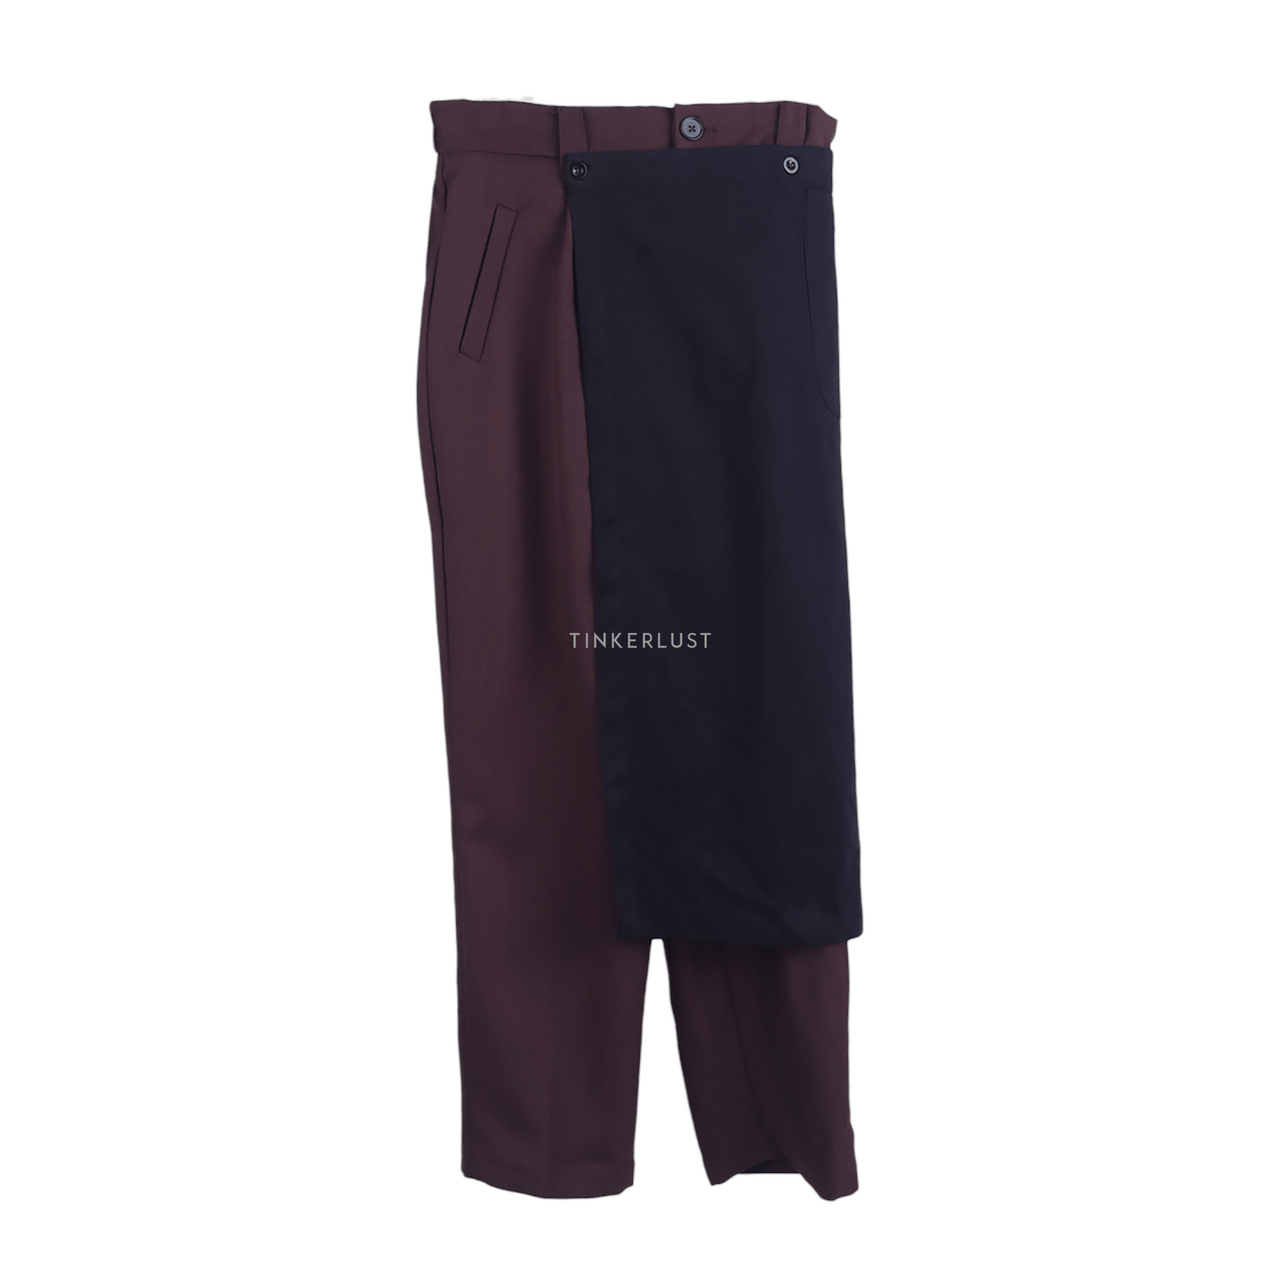 Private Collection Brown & Black Long Pants